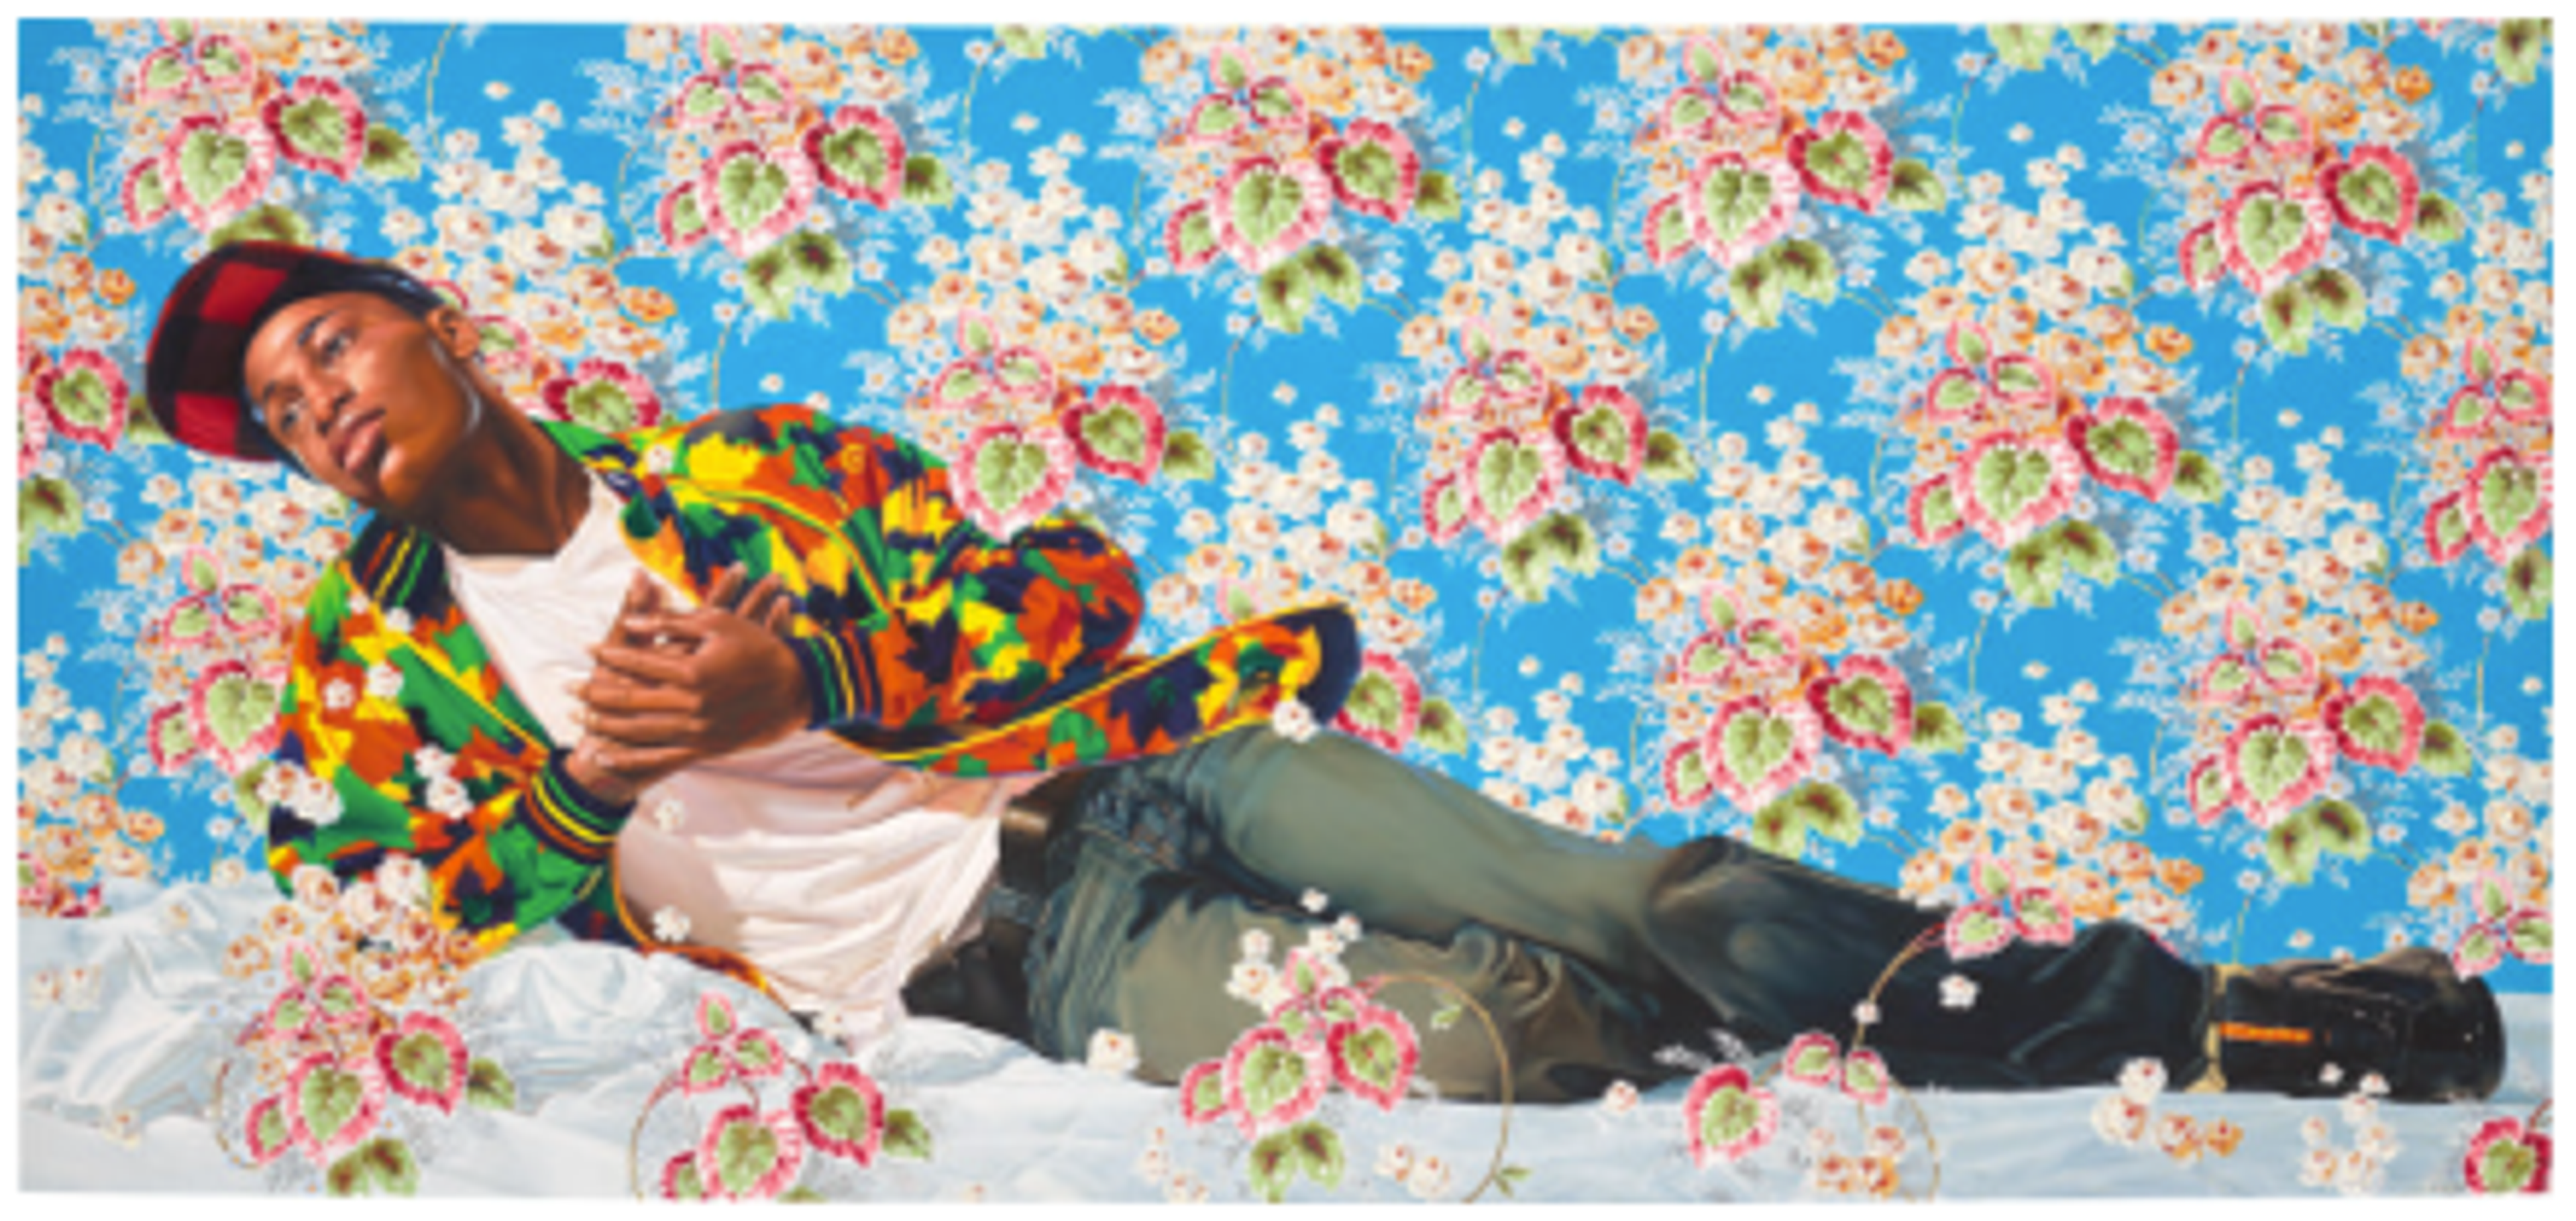 Christian Martyr Tarcisius by Kehinde Wiley - Phillips